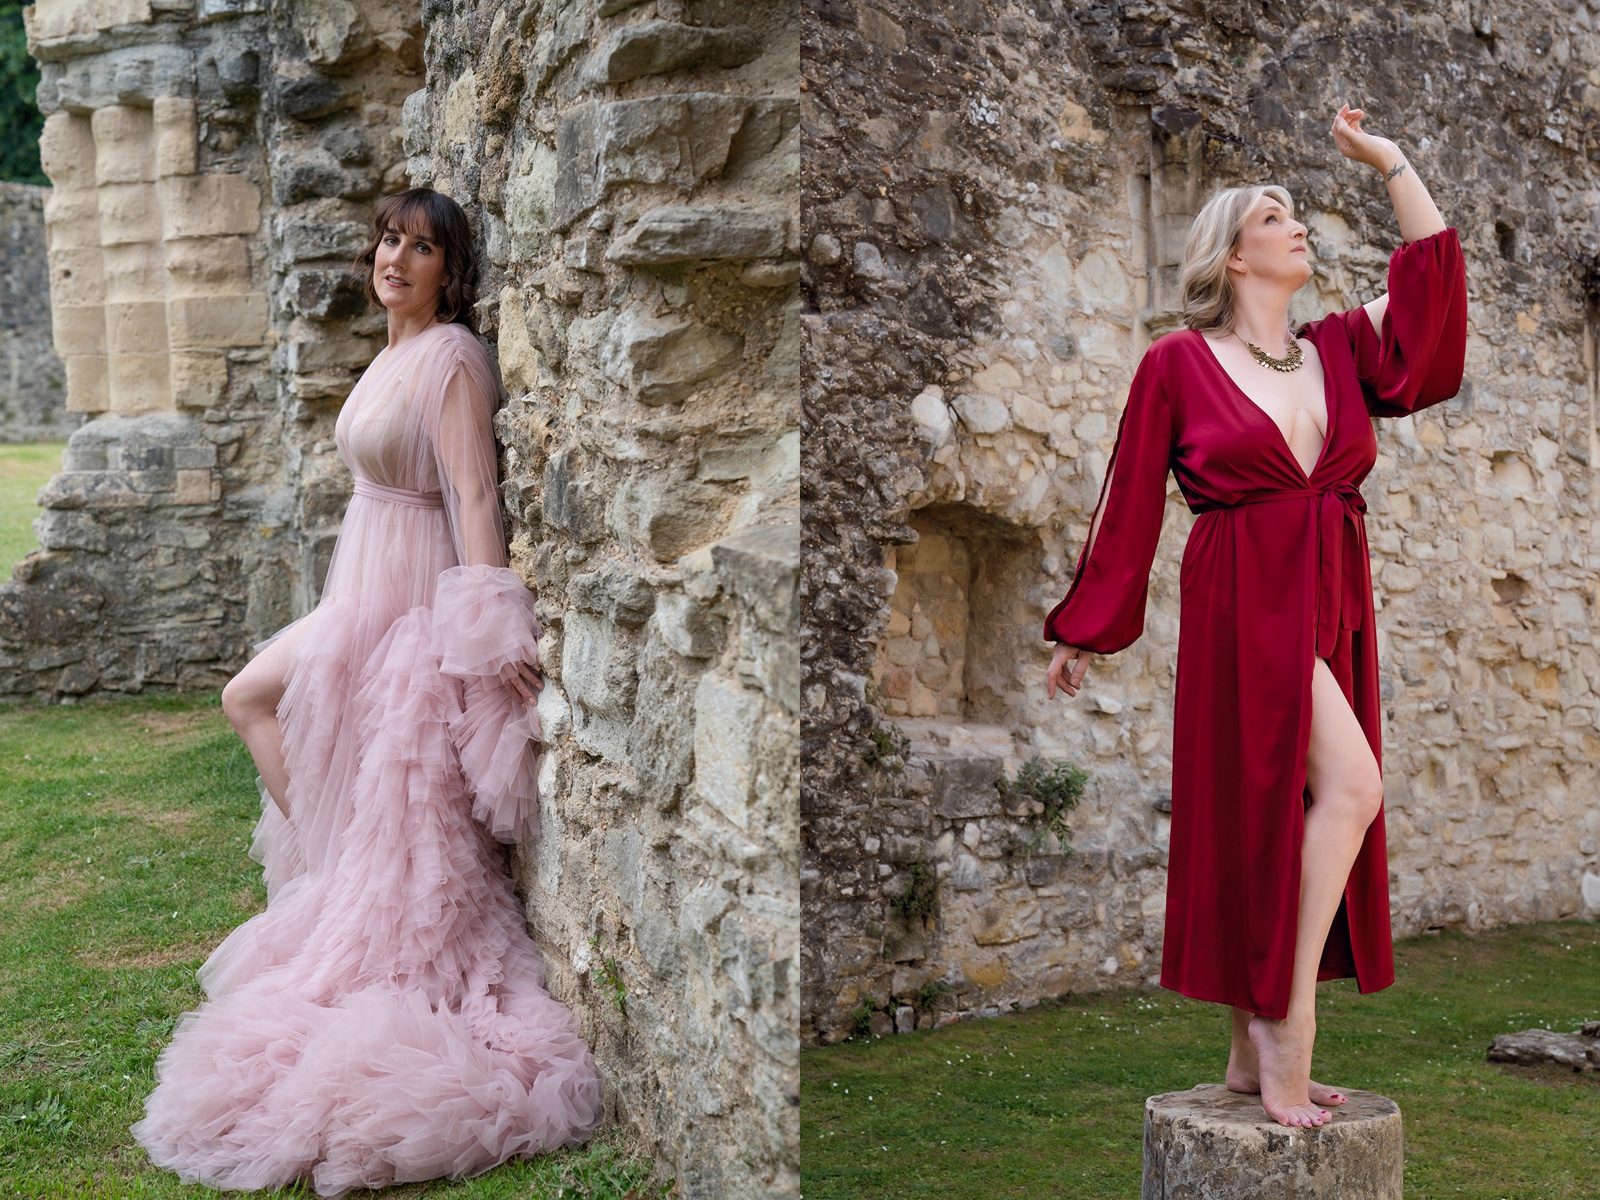 Elegant portraits taken on location within the grounds of a castle in Hampshire